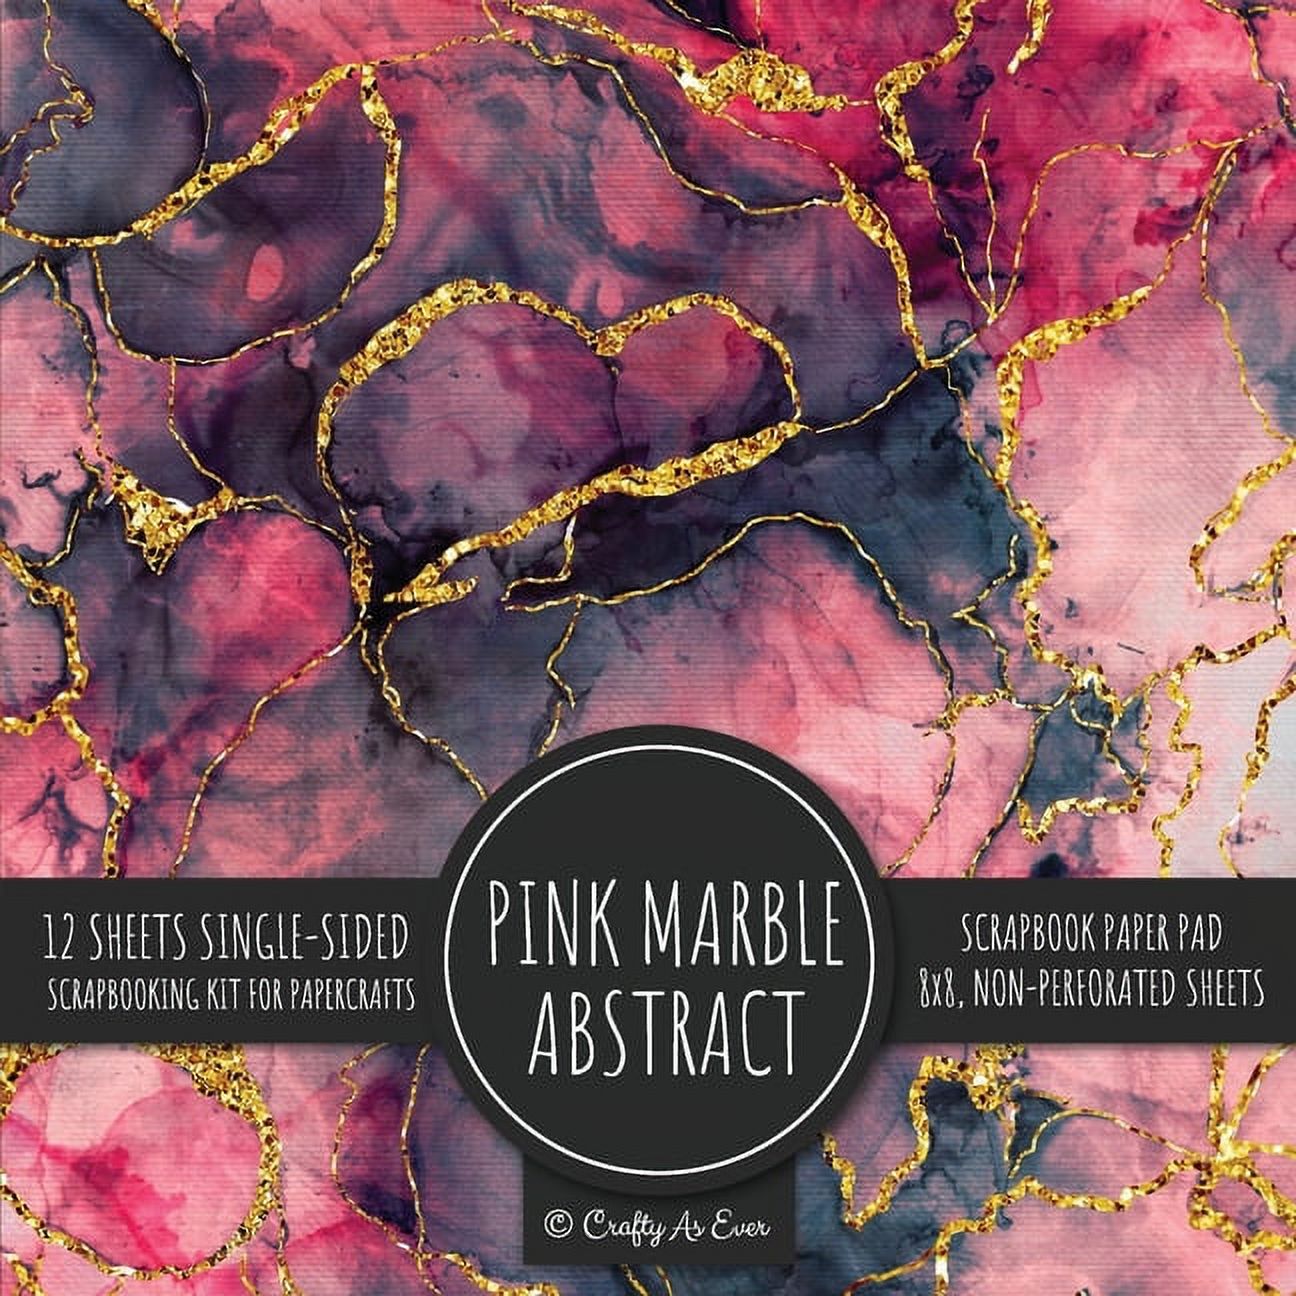 Pink Marble Abstract Scrapbook Paper Pad: Texture Background 8x8 Decorative Paper Design Scrapbooking Kit for Cardmaking, DIY Crafts, Creative Projects